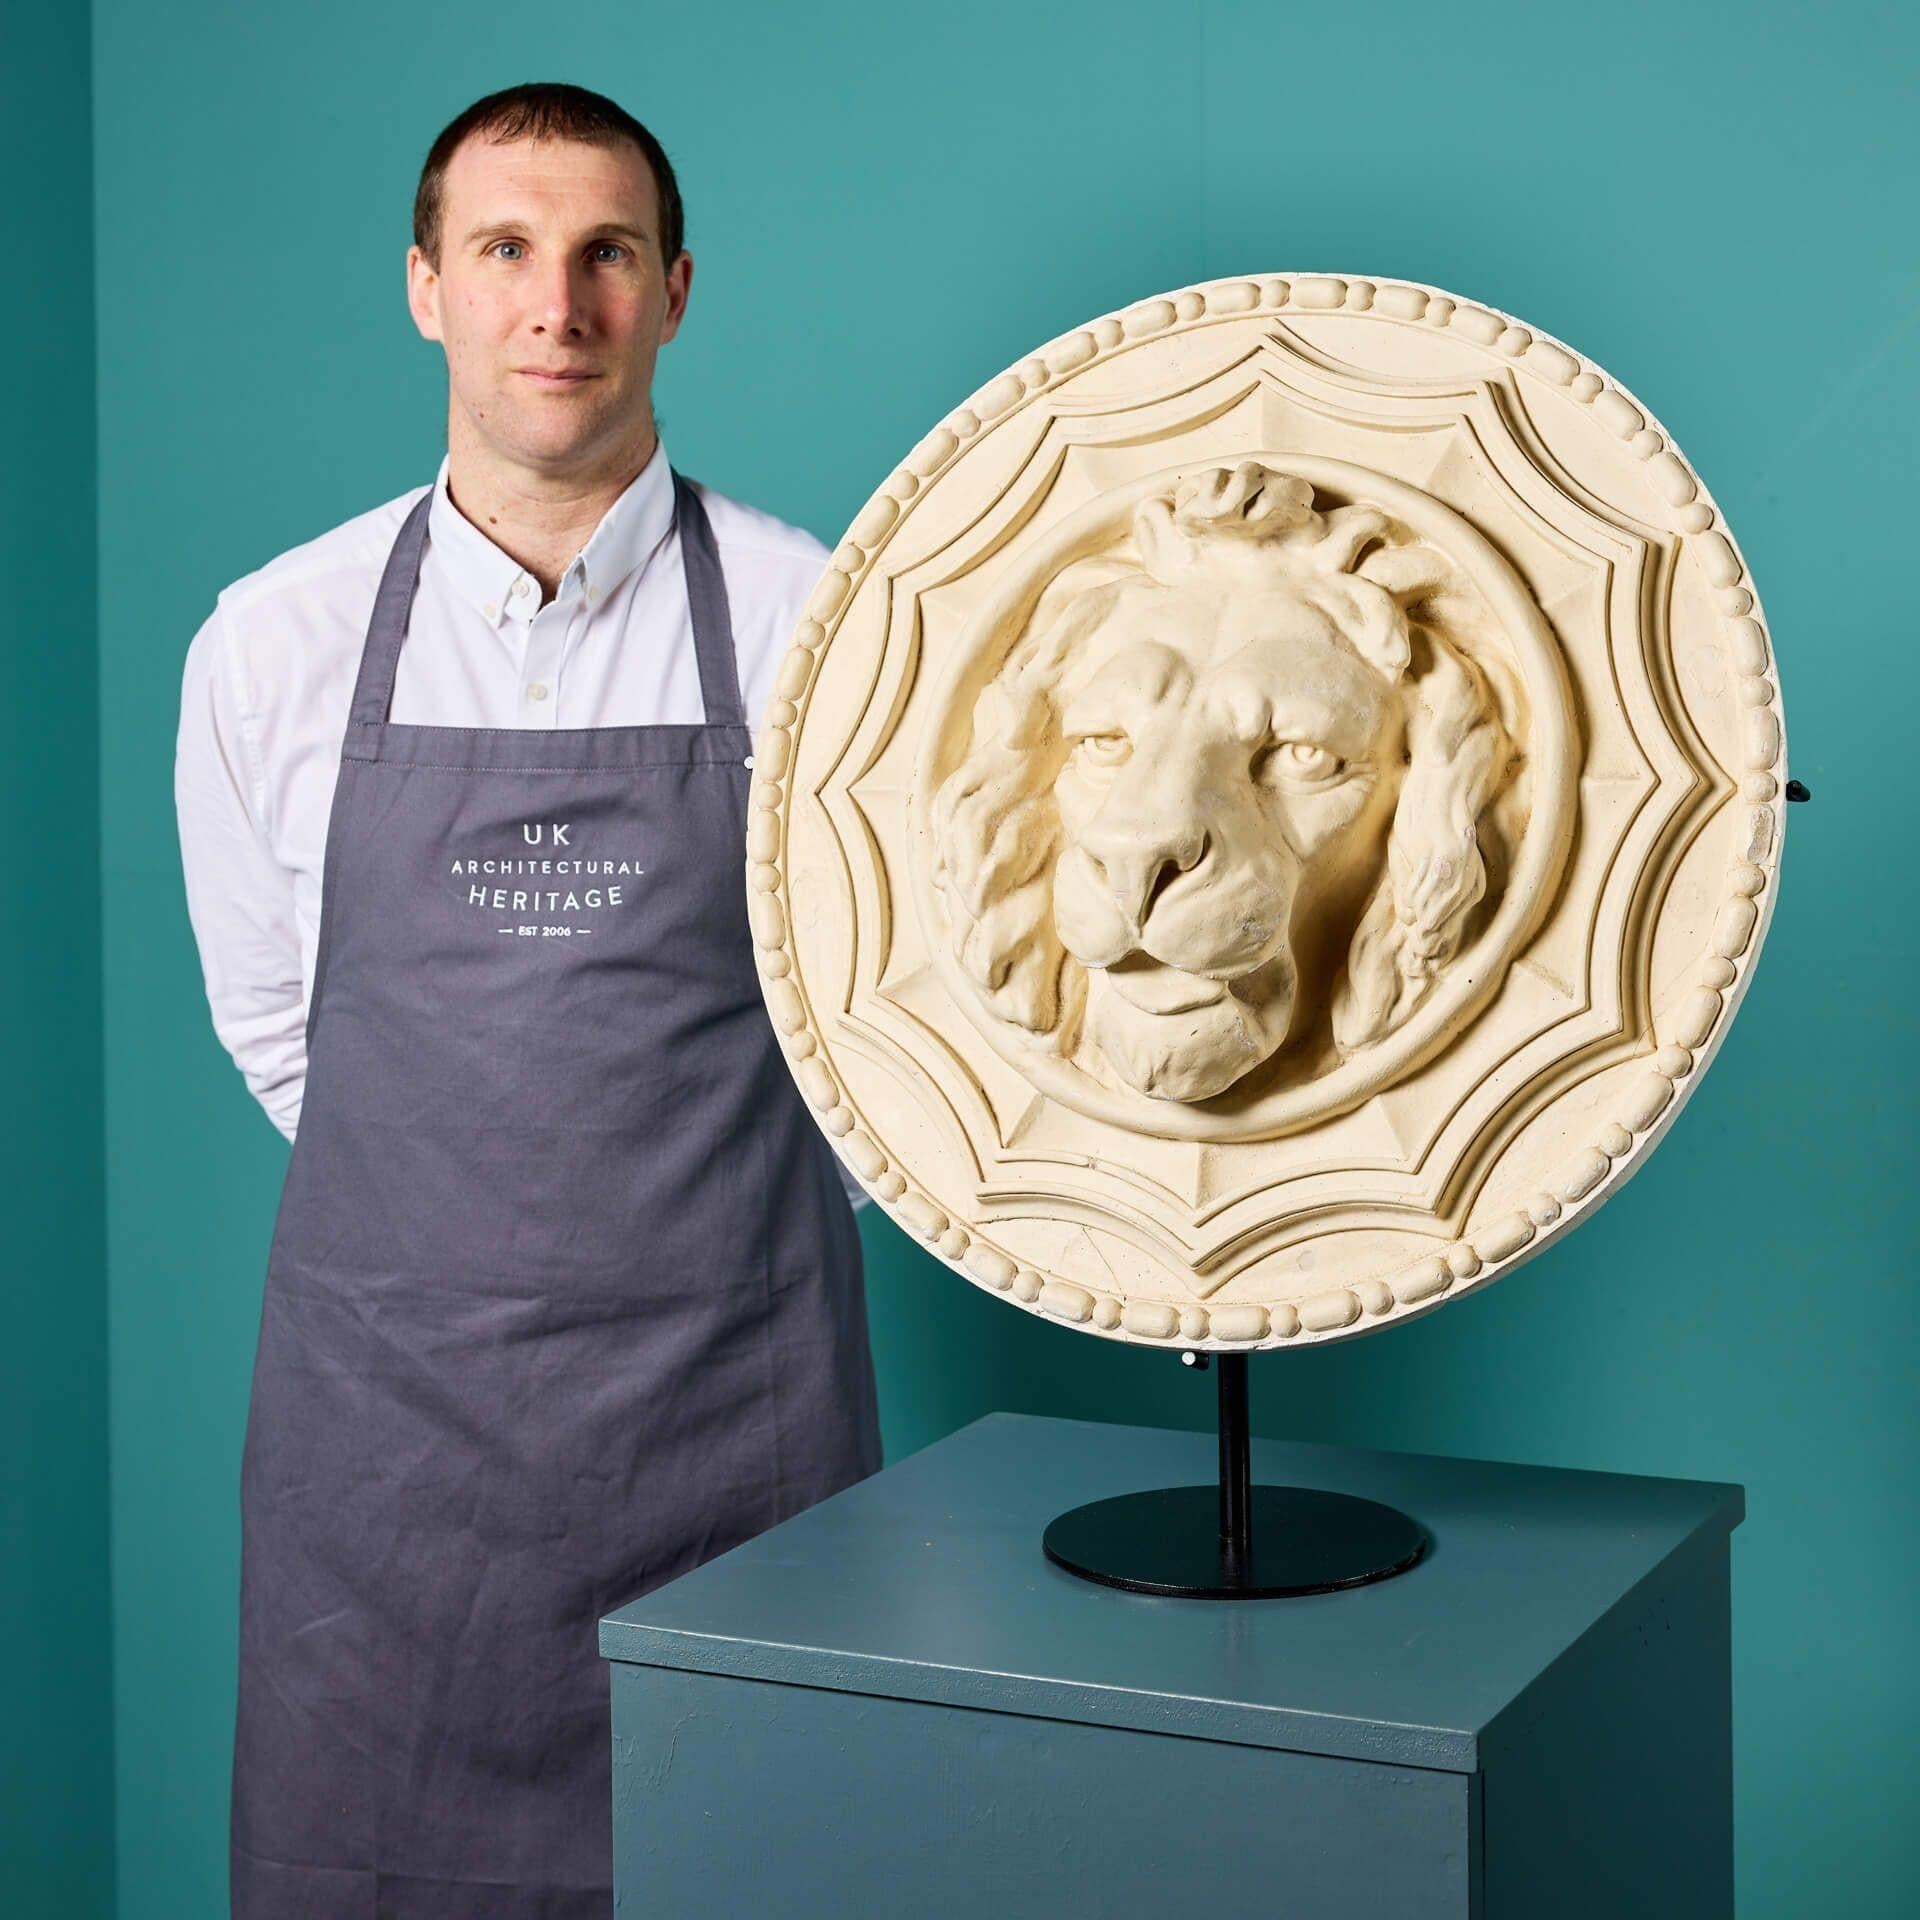 An early 20th century English plaster lion head centred on a large plaster roundel decorated with a bead and reel border in high relief. Perhaps once used as part of a frieze embellishment on the interior of a prestigious building or an